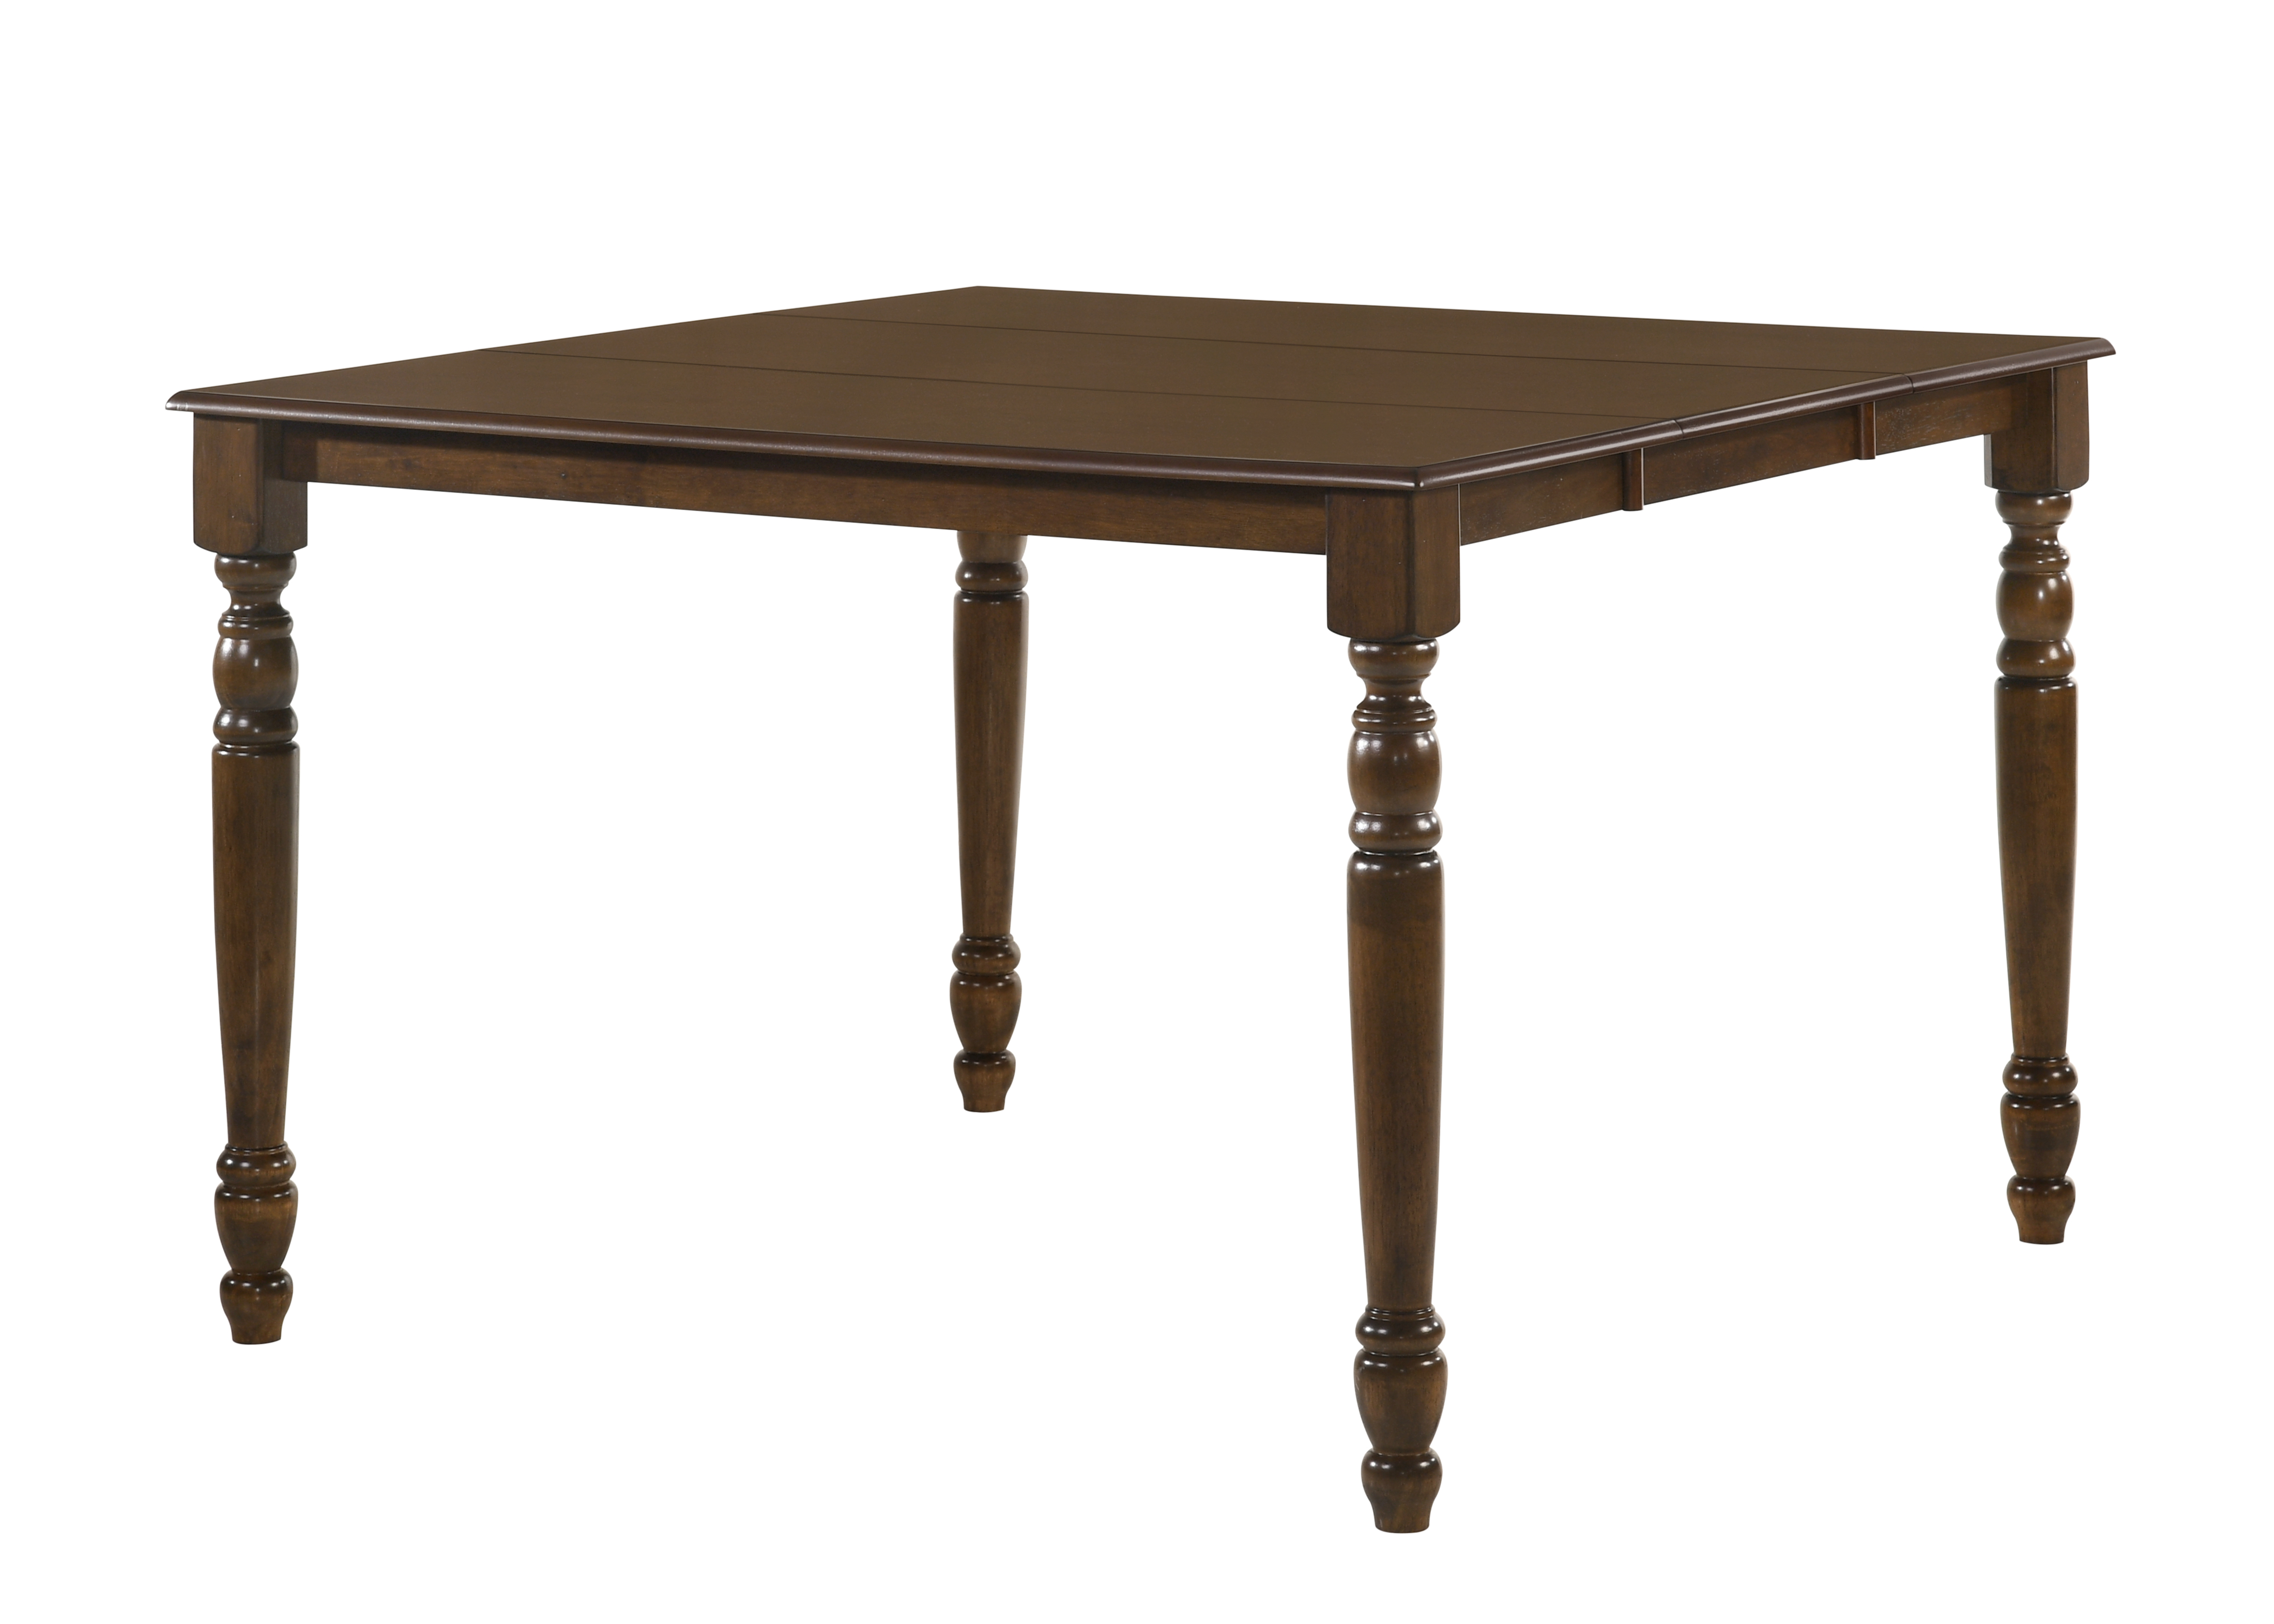 ACME Dylan Counter Height Table in Walnut Finish